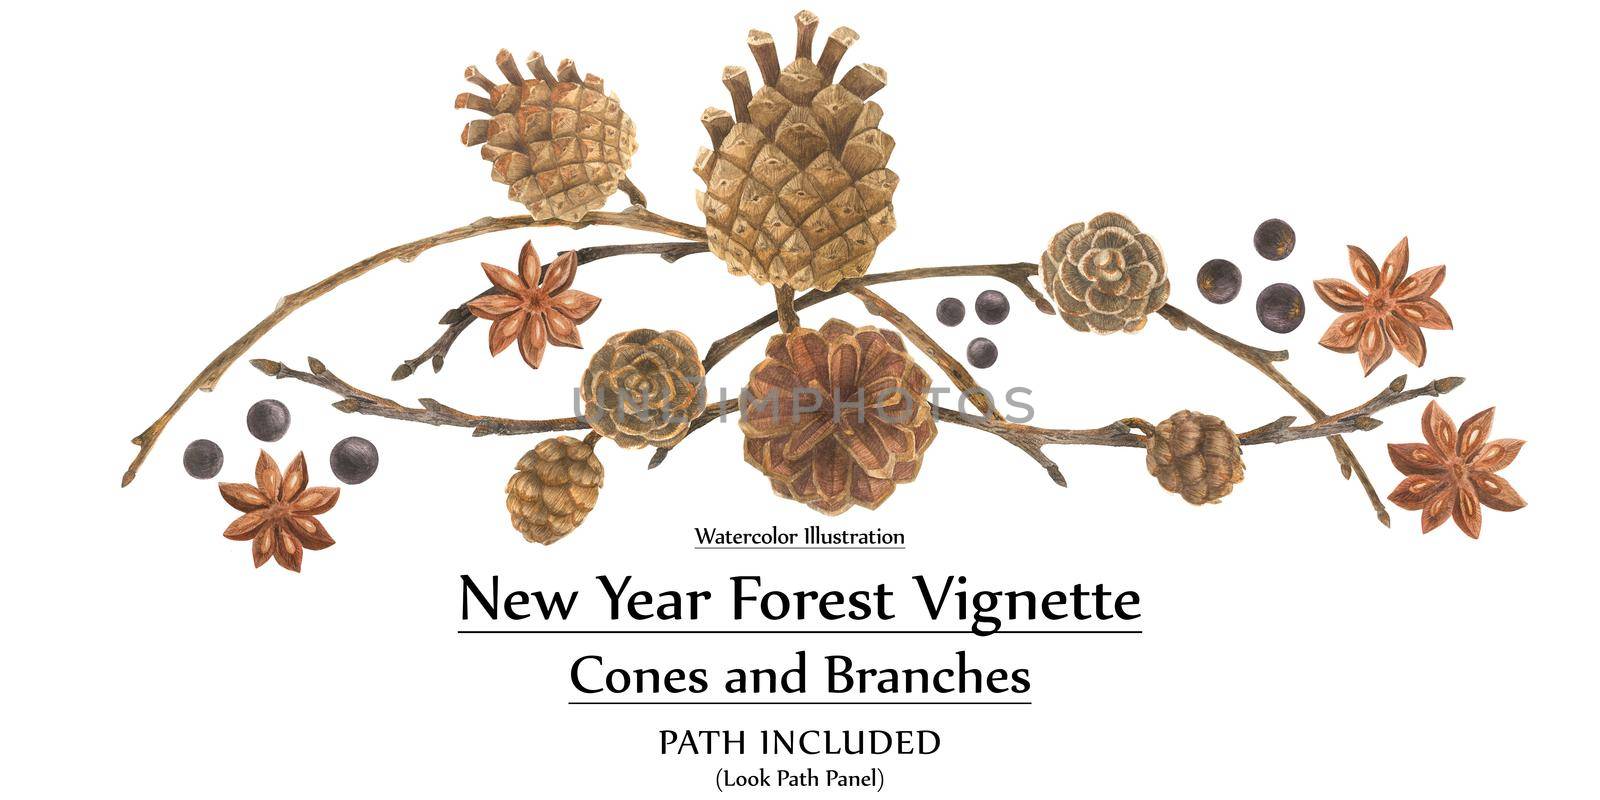 New year design vignette with branches and cones by Xeniasnowstorm